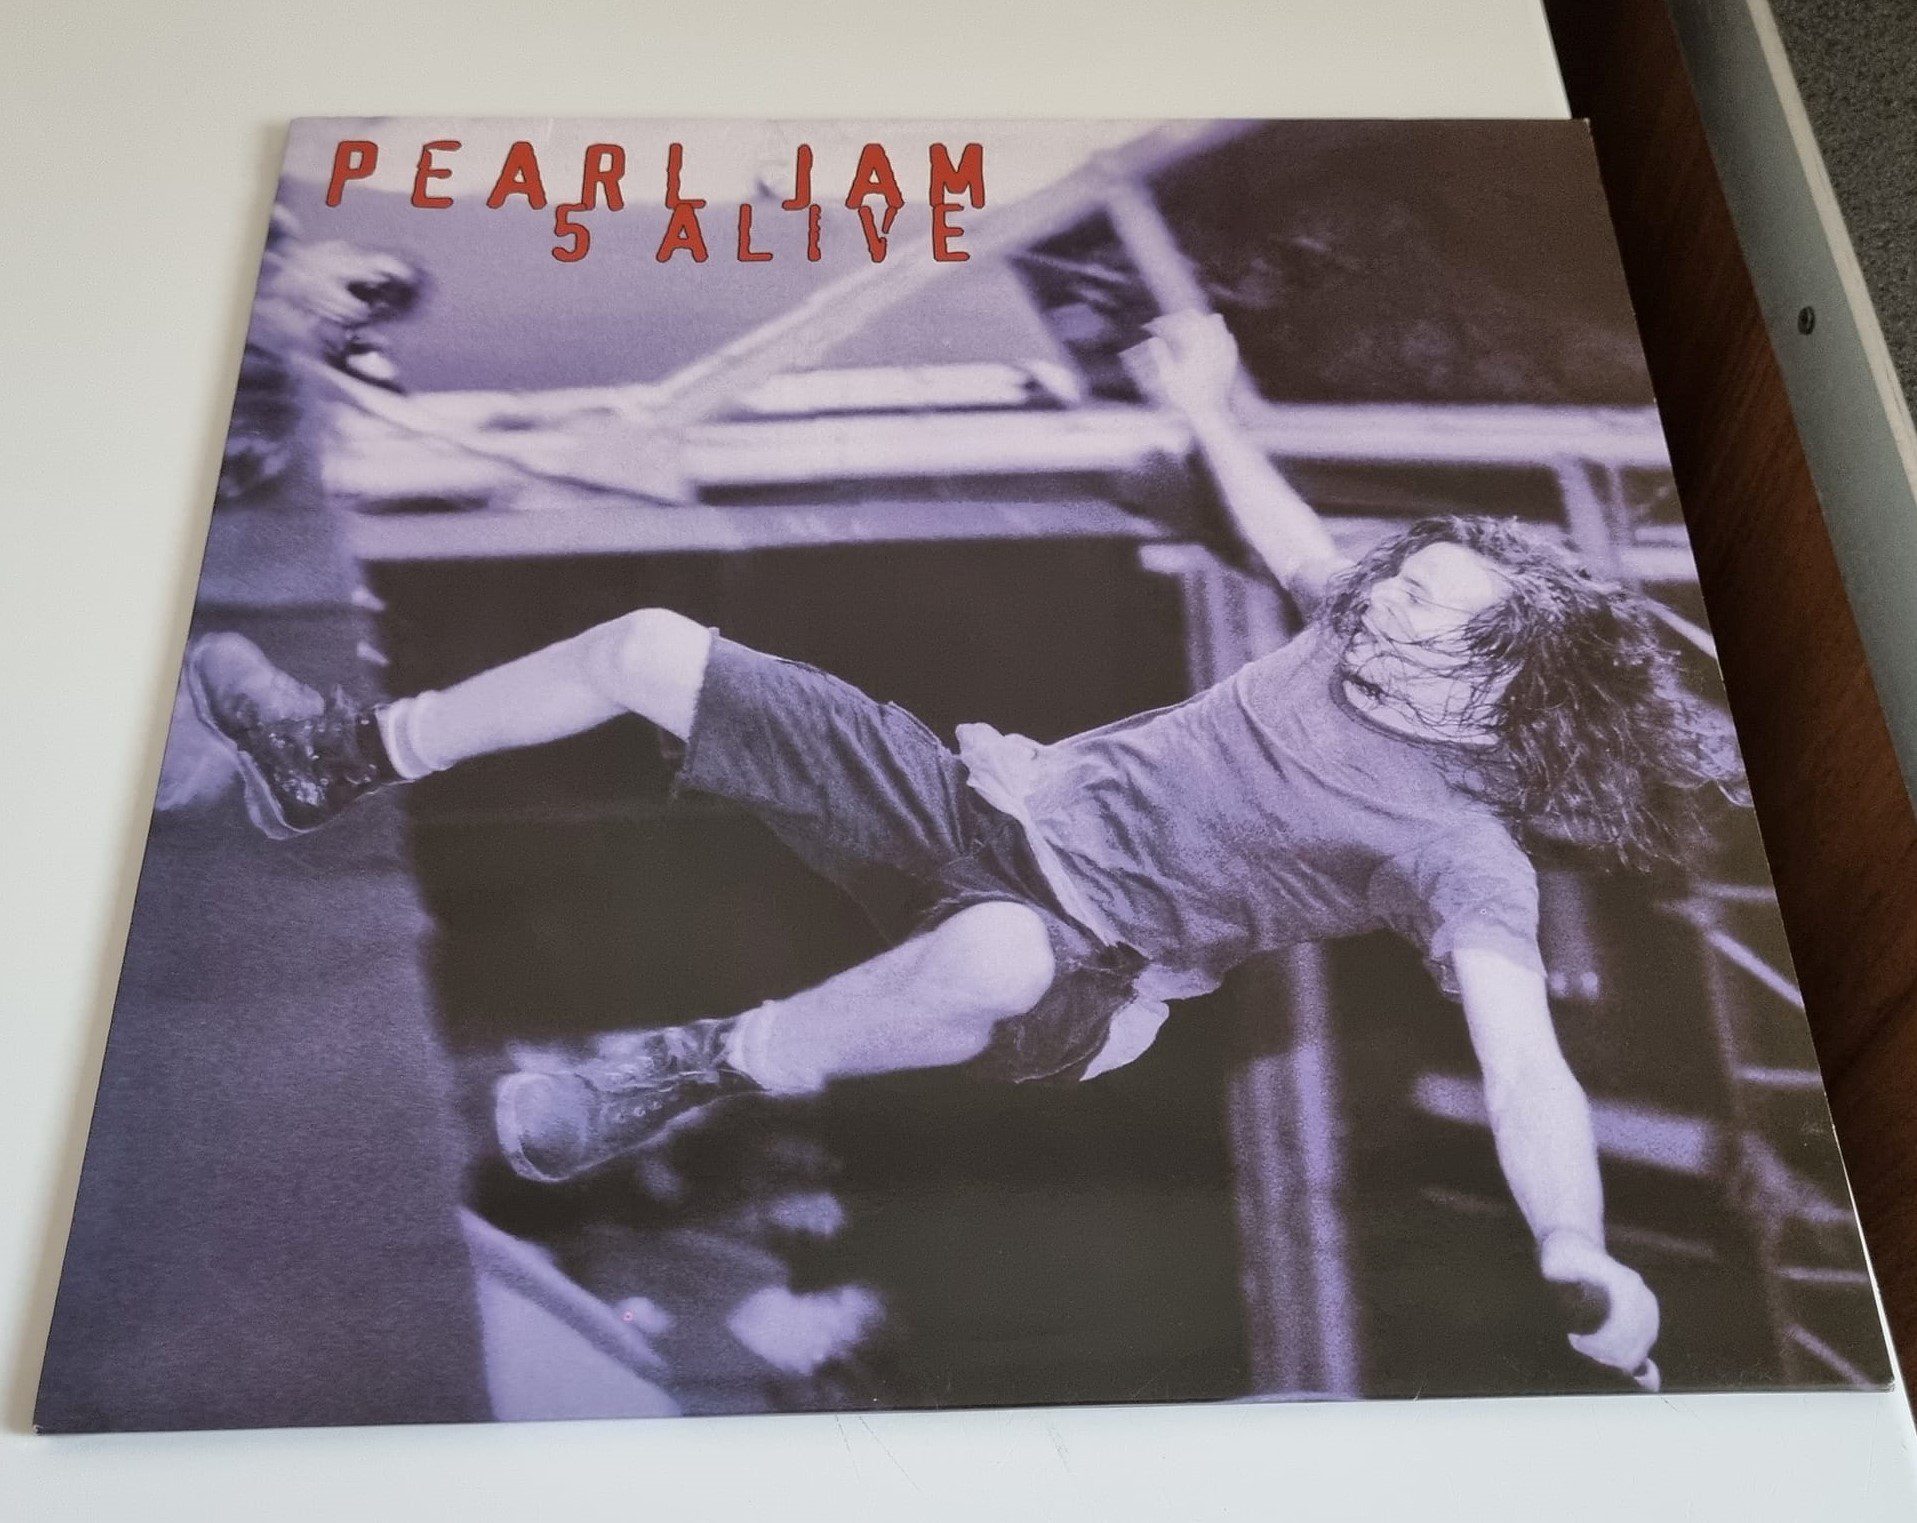 Buy this rare Pearl Jam record by clicking here